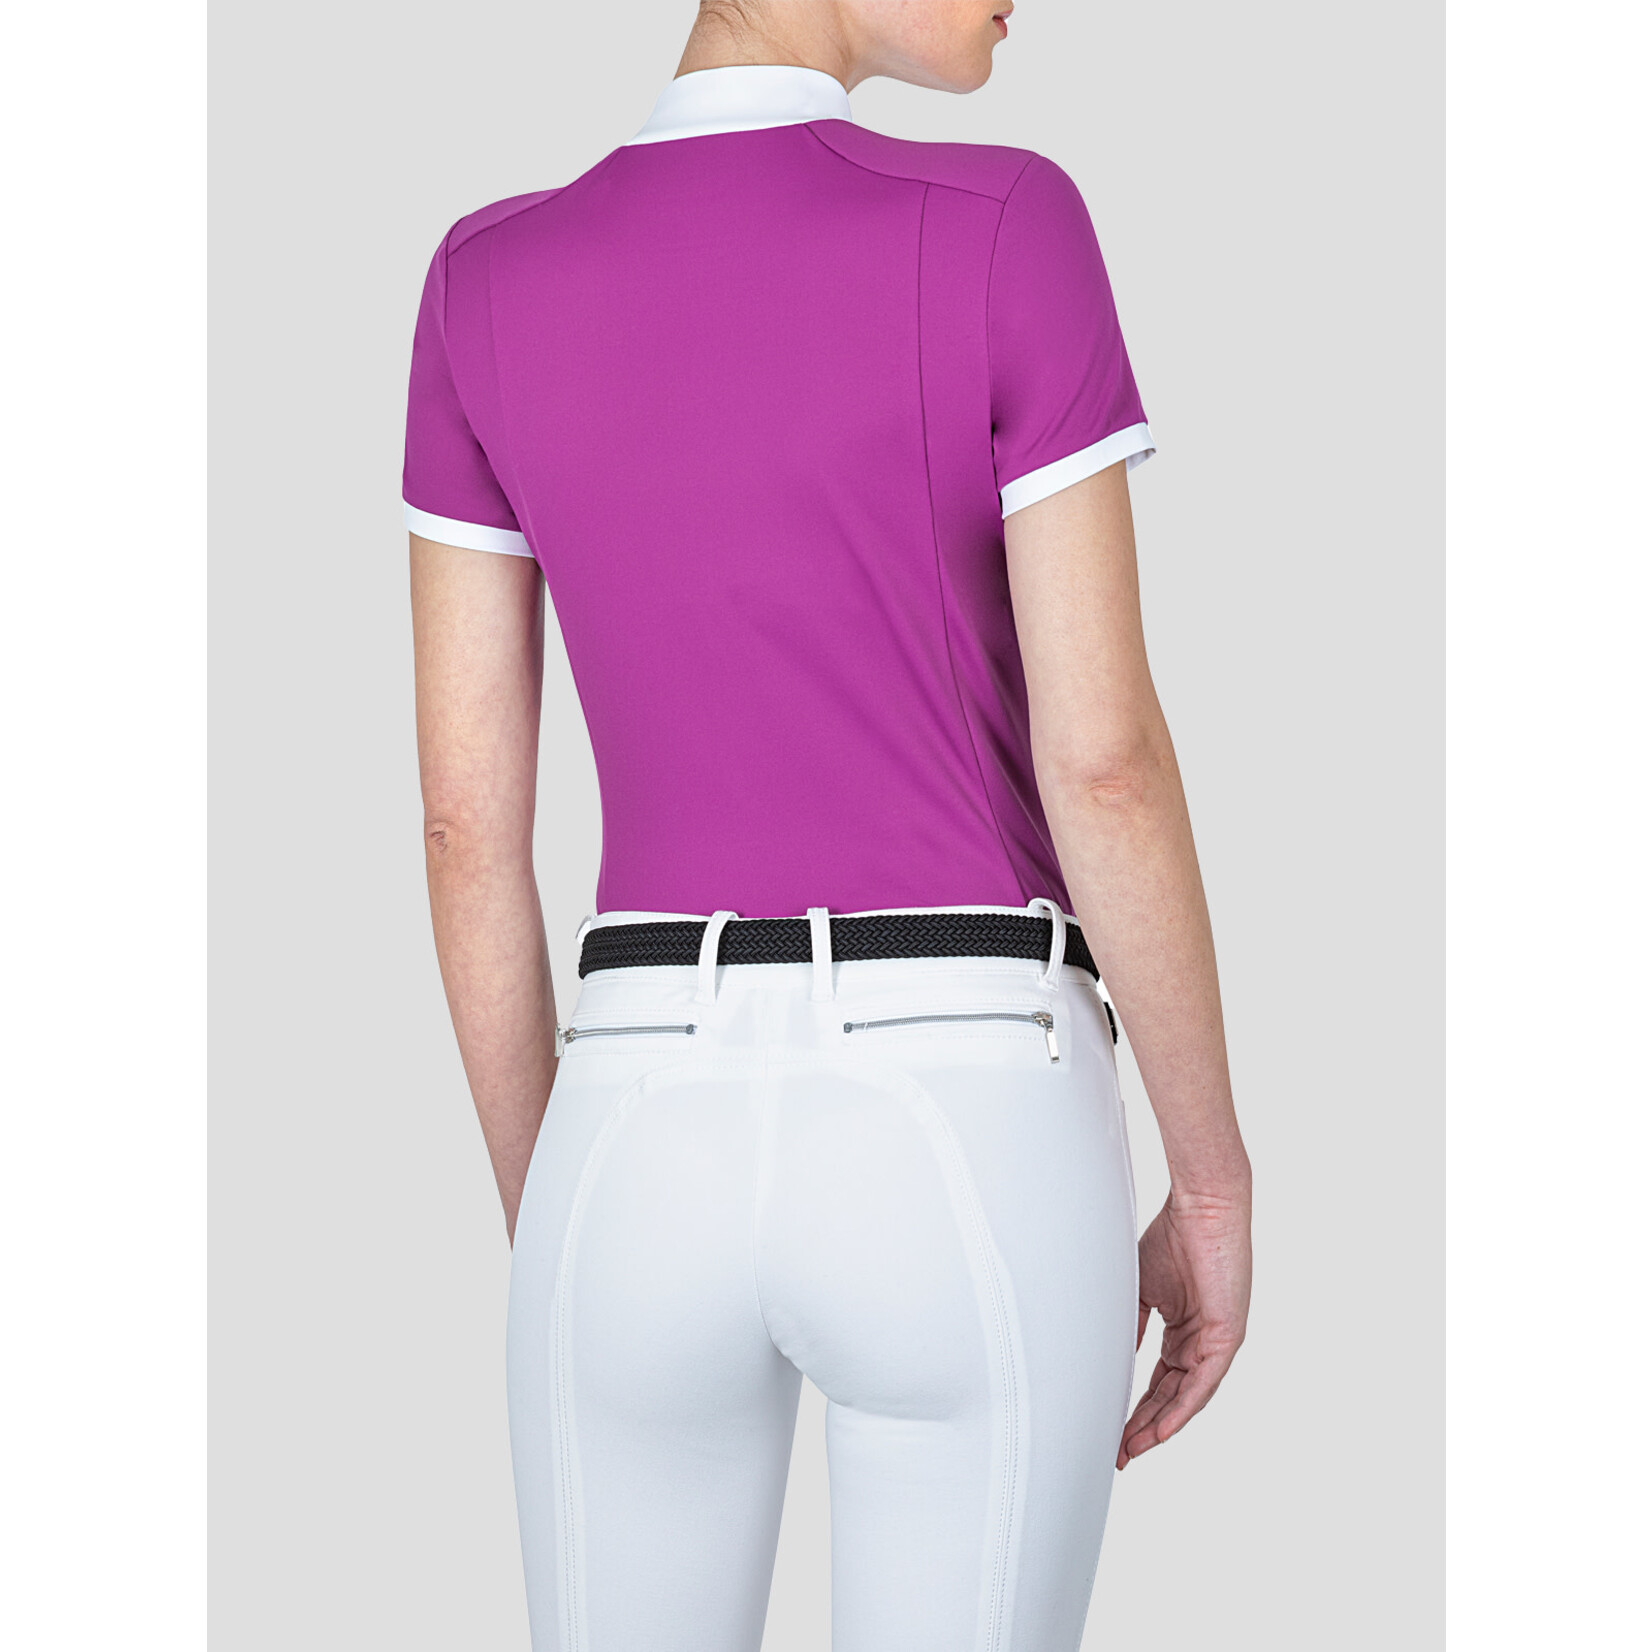 Equiline Equiline Cyanc Women's Stretch Show Shirt